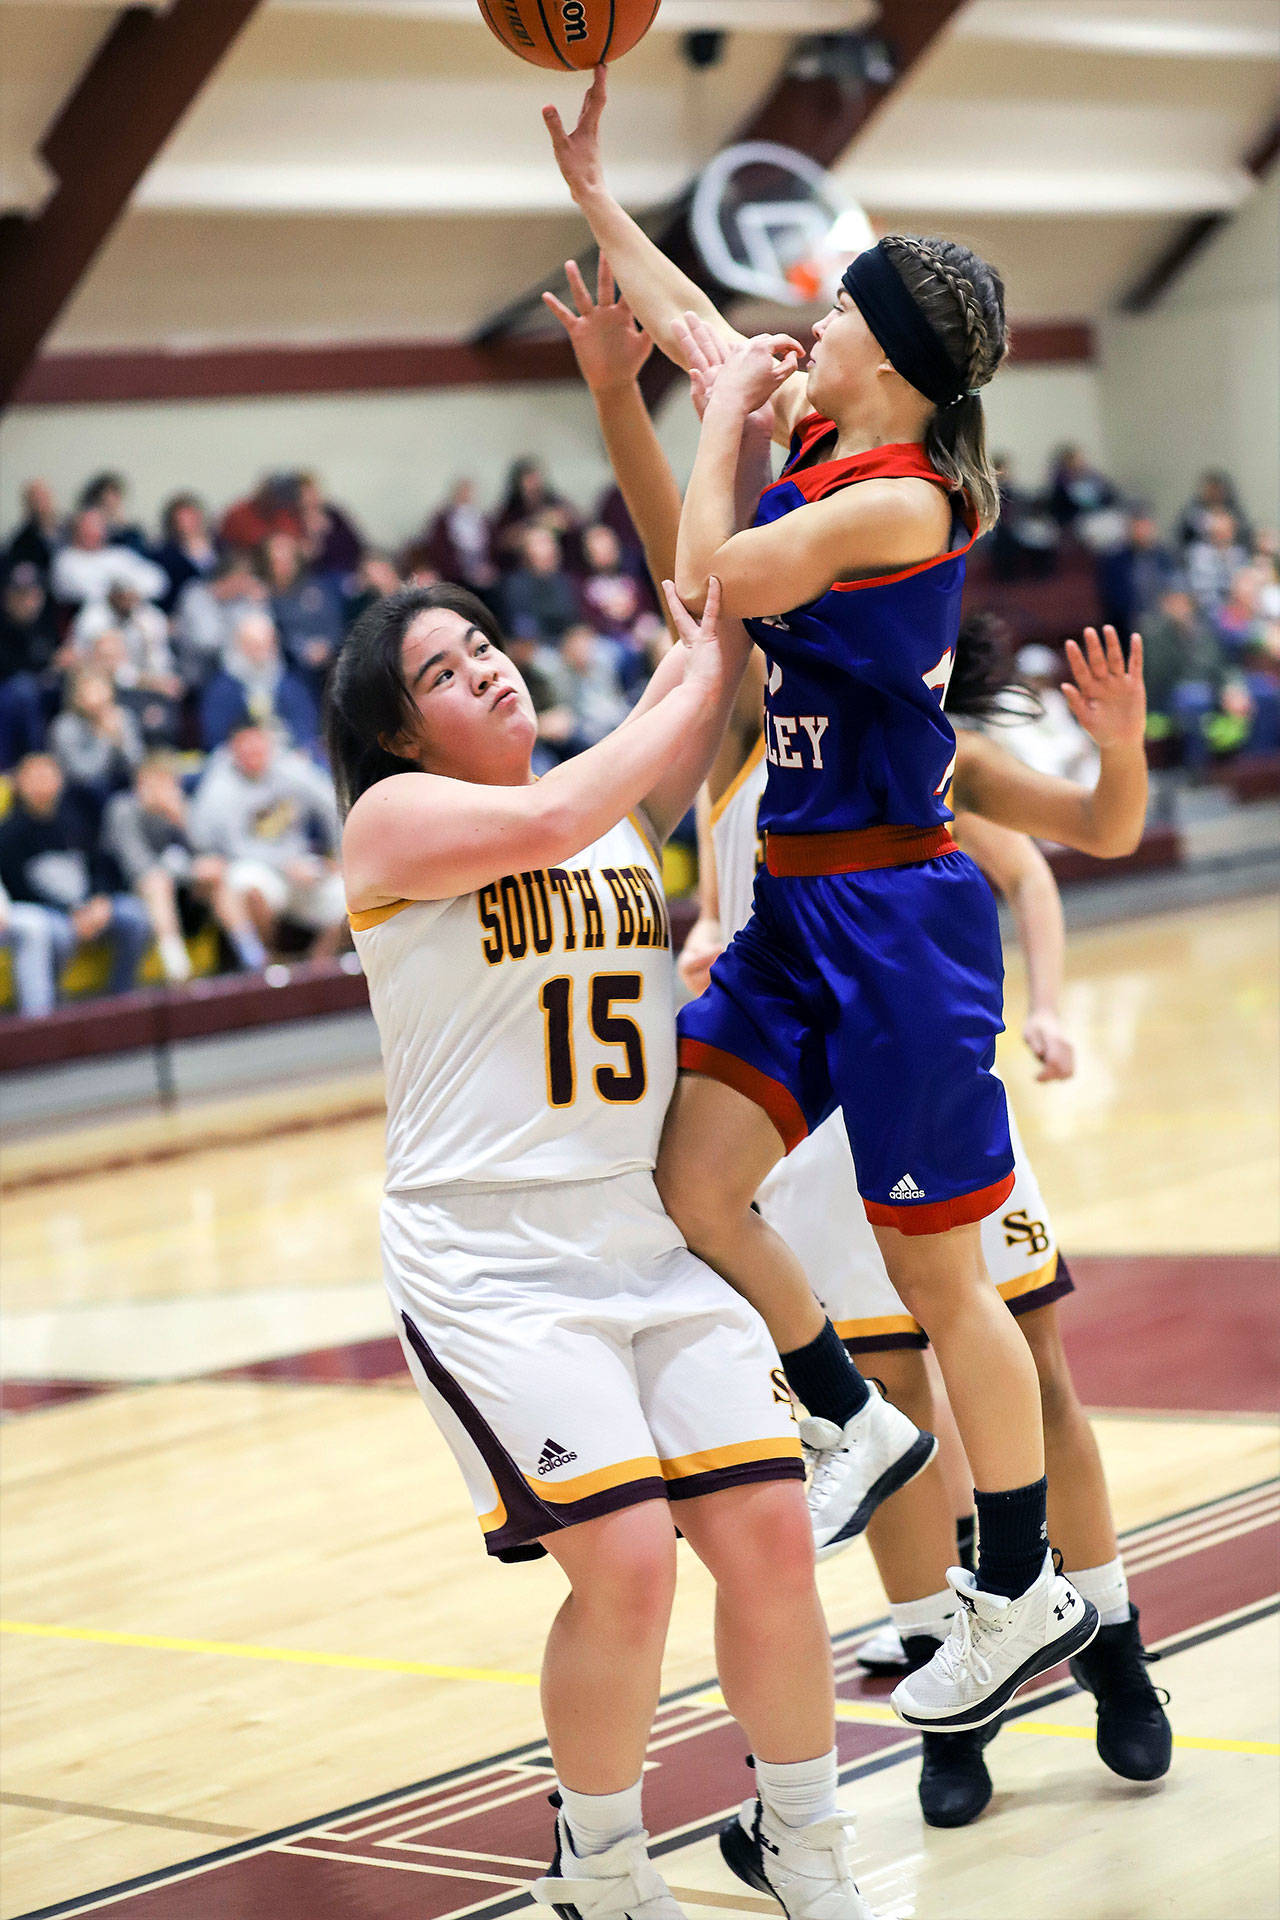 Willapa Valley’s Brooke Friese, right, goes up for a shot against South Bend’s Alise Rohr on Jan. 19. Both the Indians and the Vikings will be playing at the 2B State Tournament, which tips-off Wednesday at the Spokane Arena. (Photo by Larry Bale)